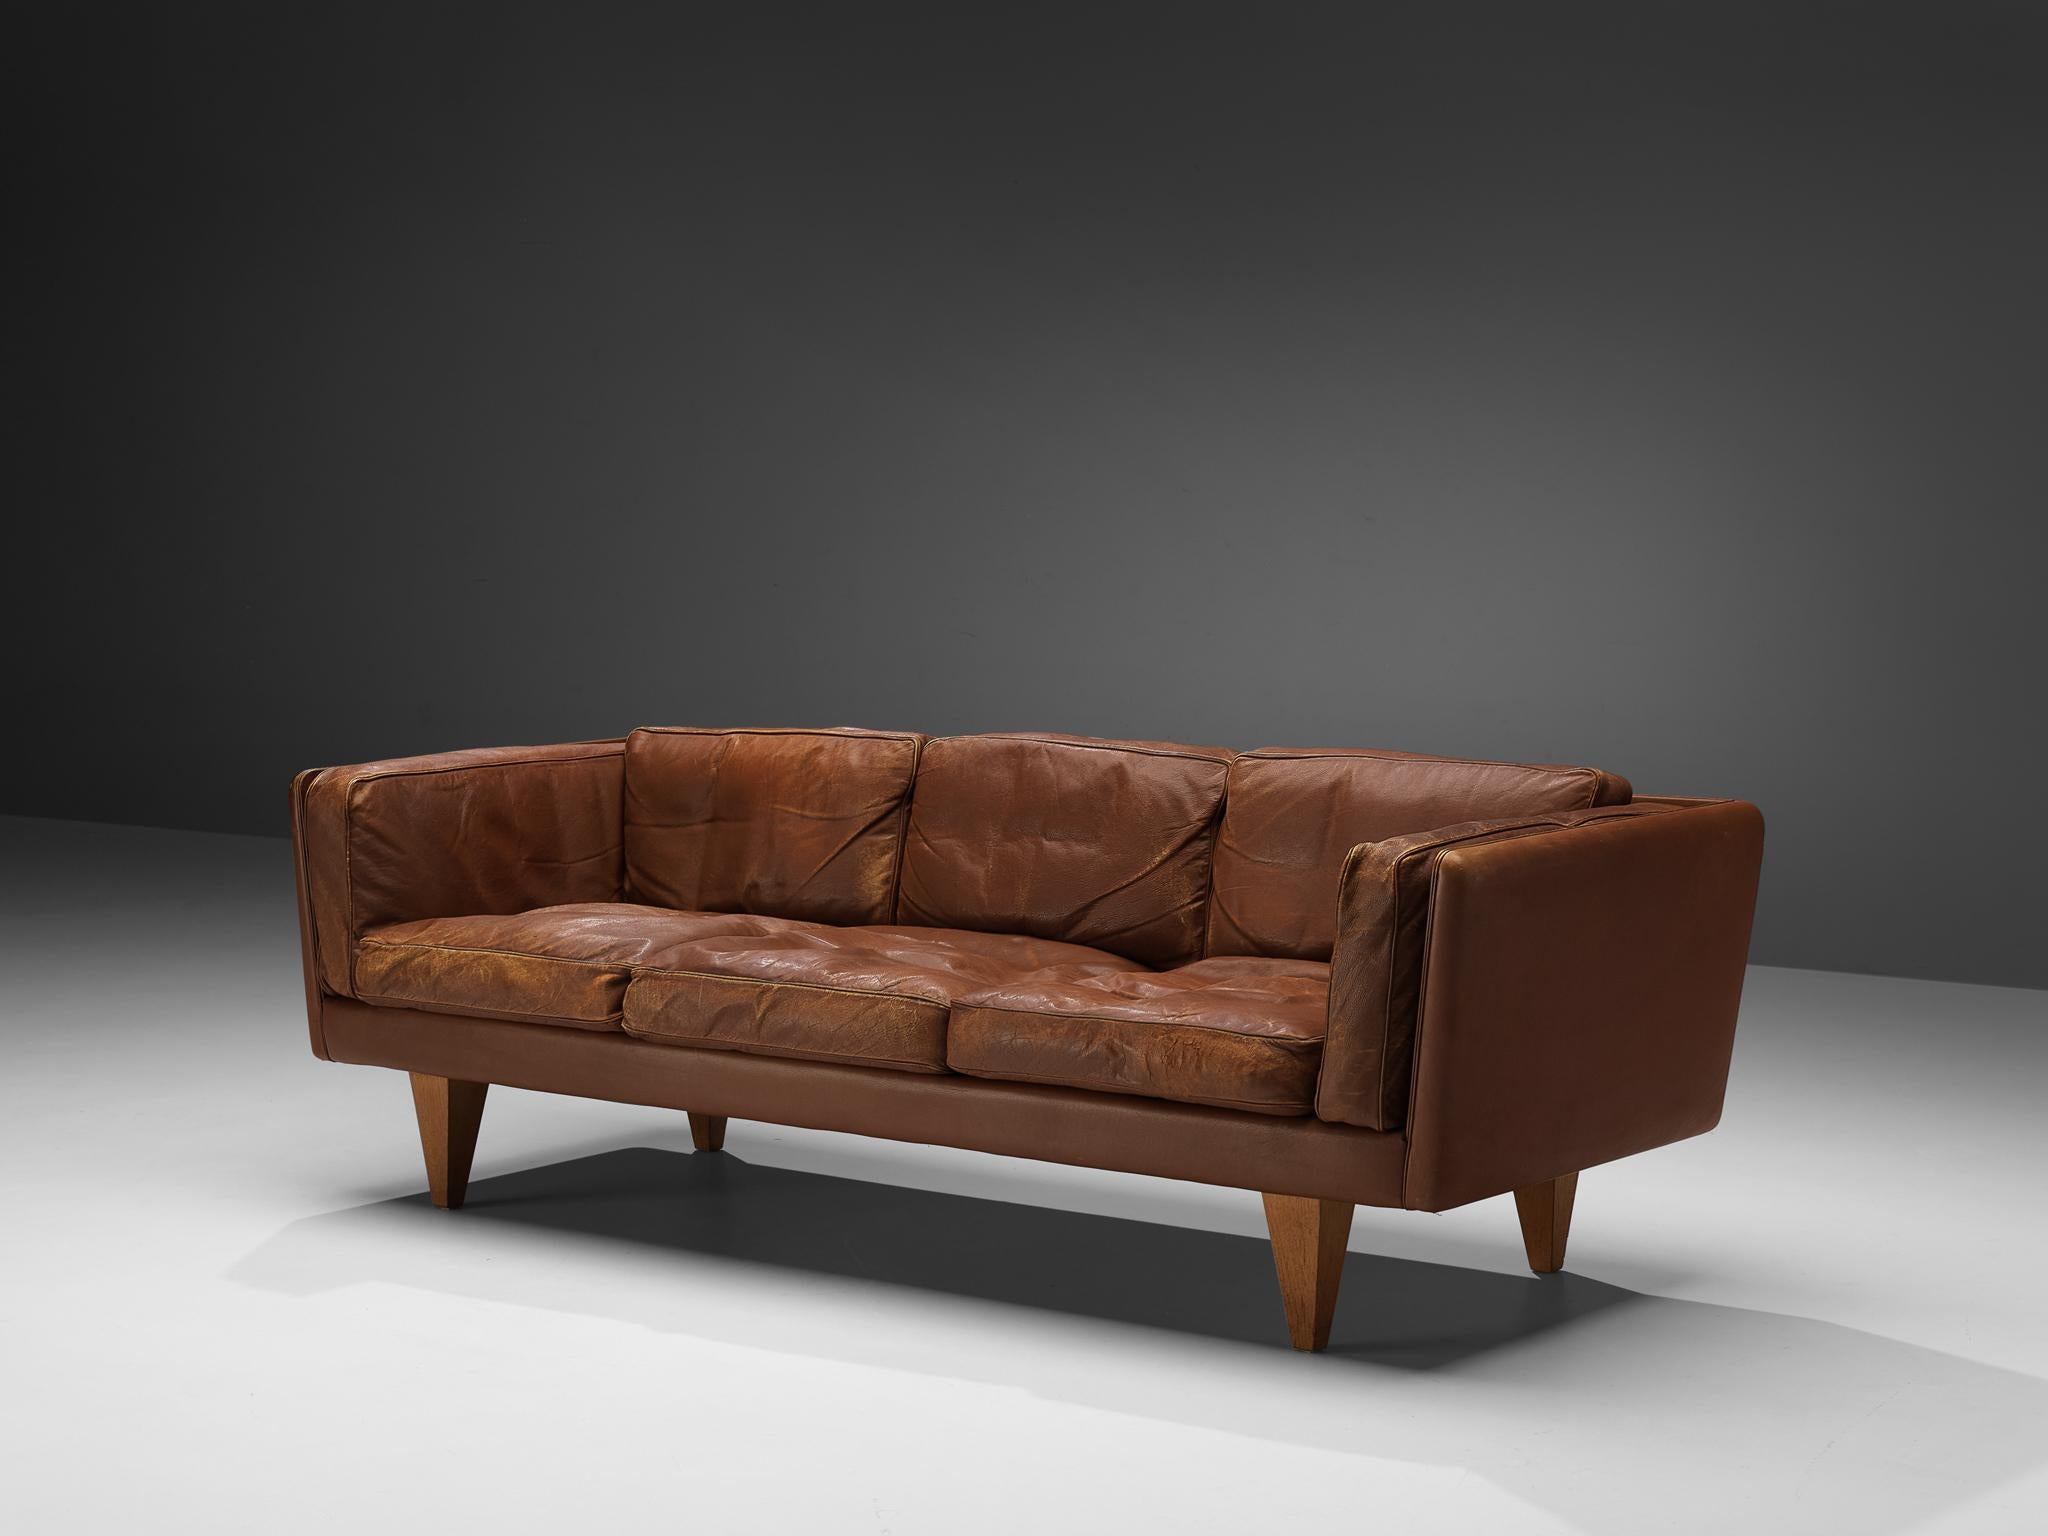 Illum Wikkelsø, sofa, model 'V11', leather, oak, Denmark, 1960s

This modern sofa is designed by Illum Wikkelsø and is marked by a clear open layout and the use of neutral materials. The seat and frame are executed in a fine cognac brown leather and